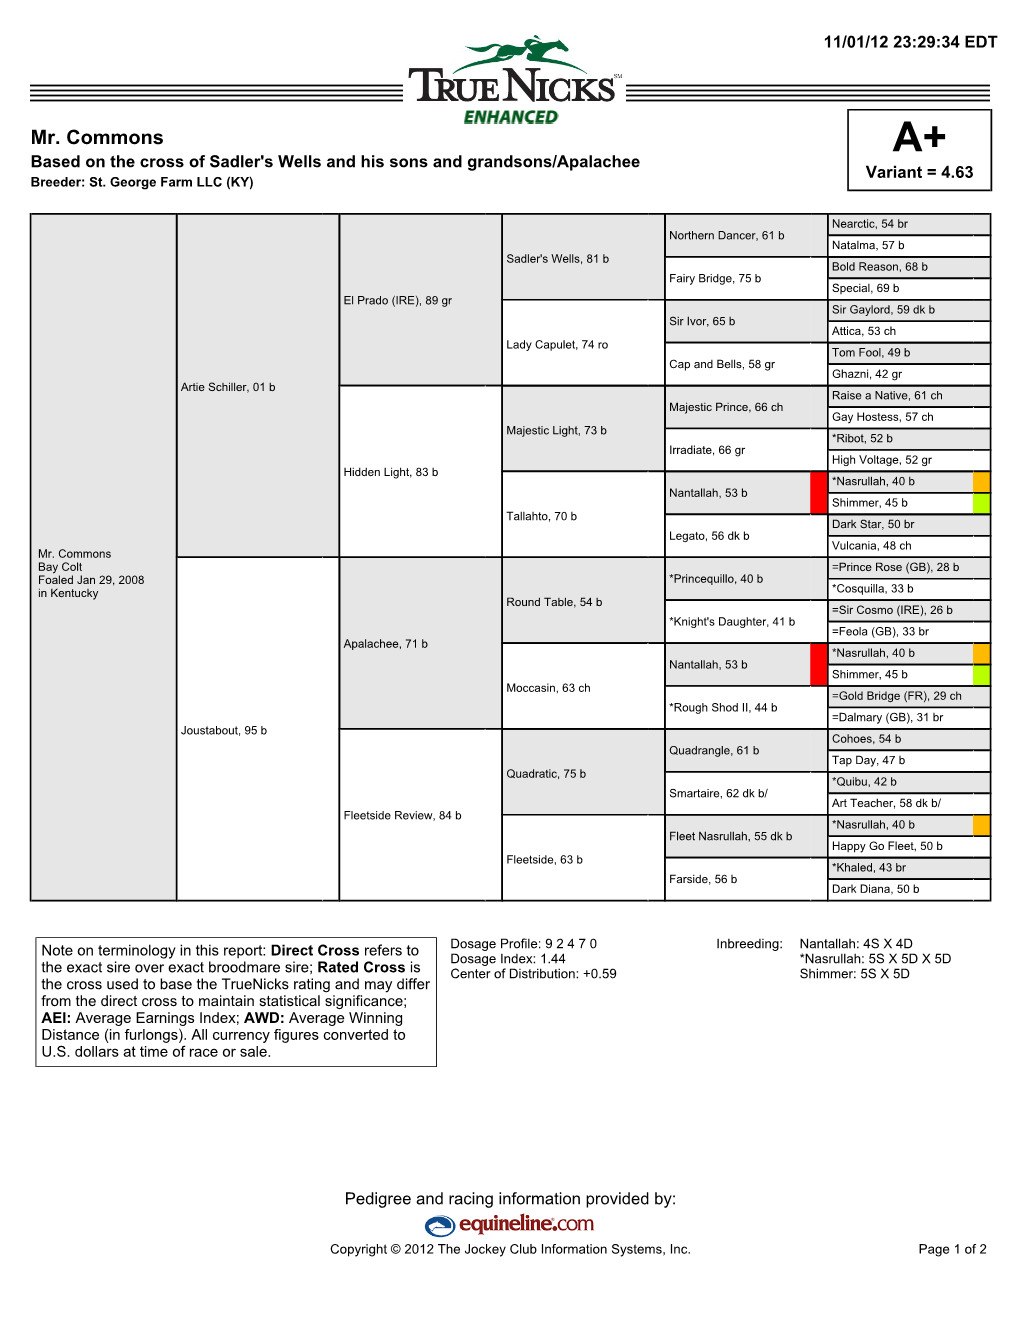 Mr. Commons A+ Based on the Cross of Sadler's Wells and His Sons and Grandsons/Apalachee Variant = 4.63 Breeder: St